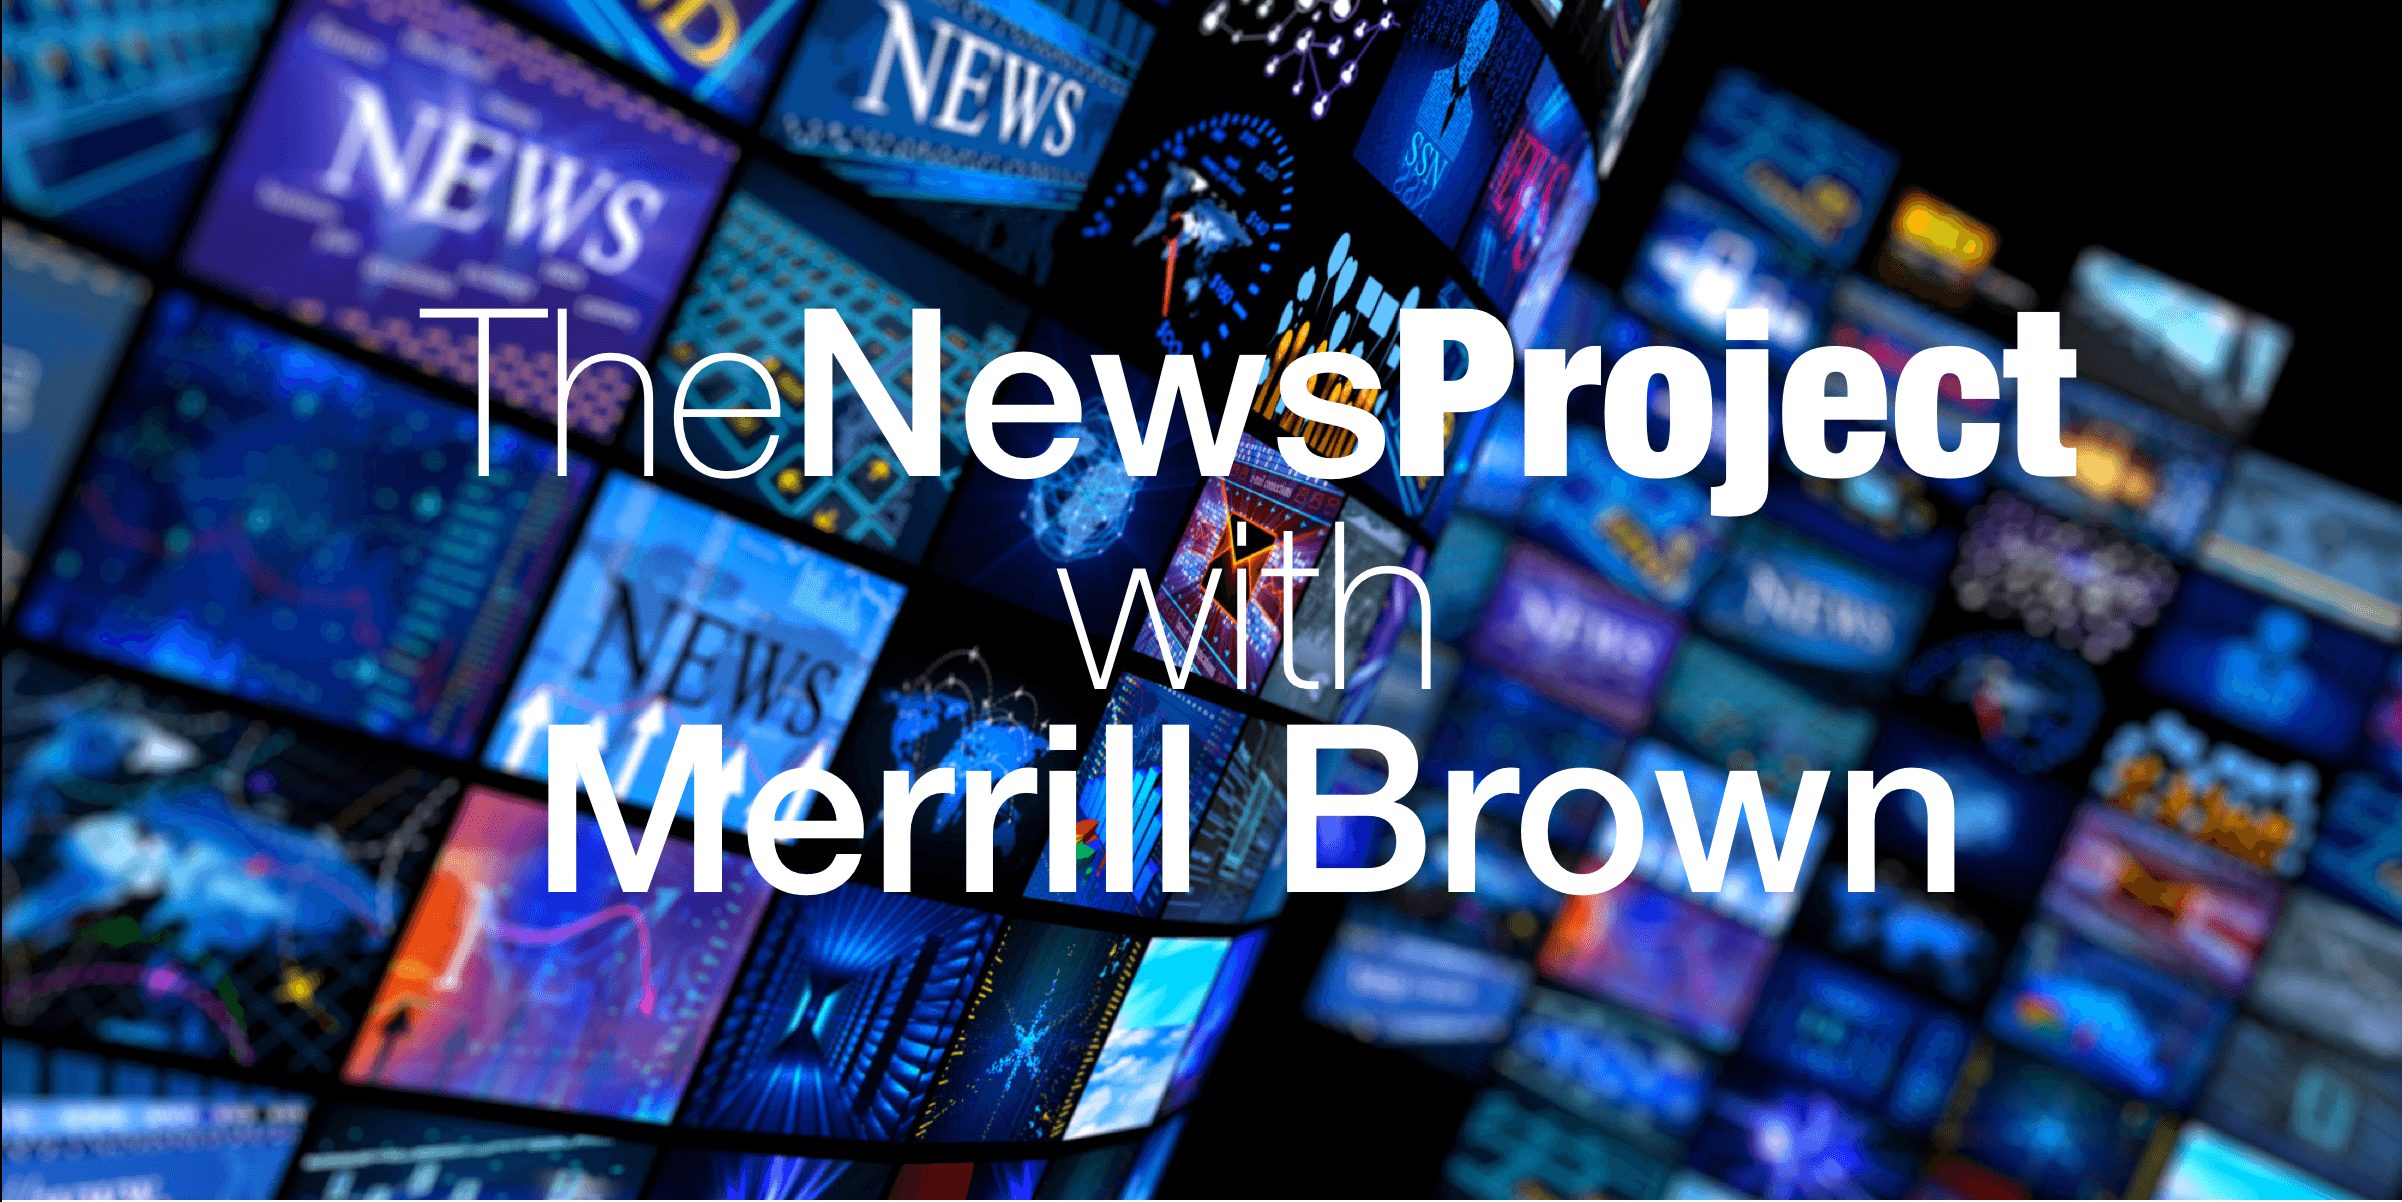 Here’s How Merrill Brown Plans To Fix The Media Problem: Check out The News Project (MDE289)